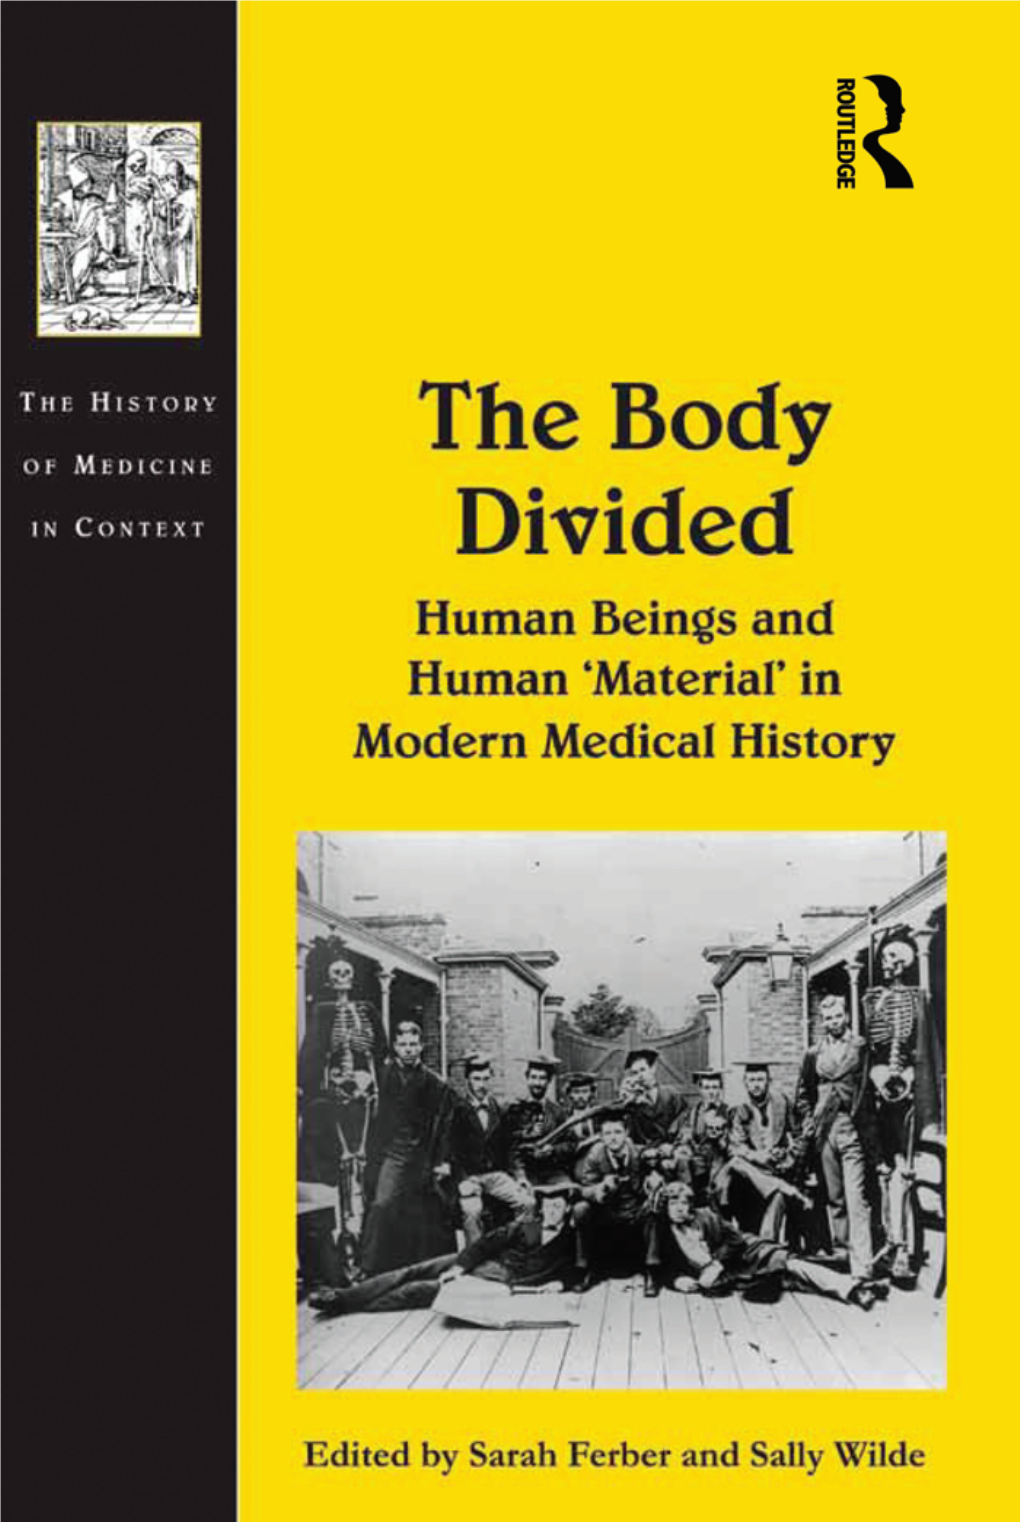 The Body Divided the History of Medicine in Context